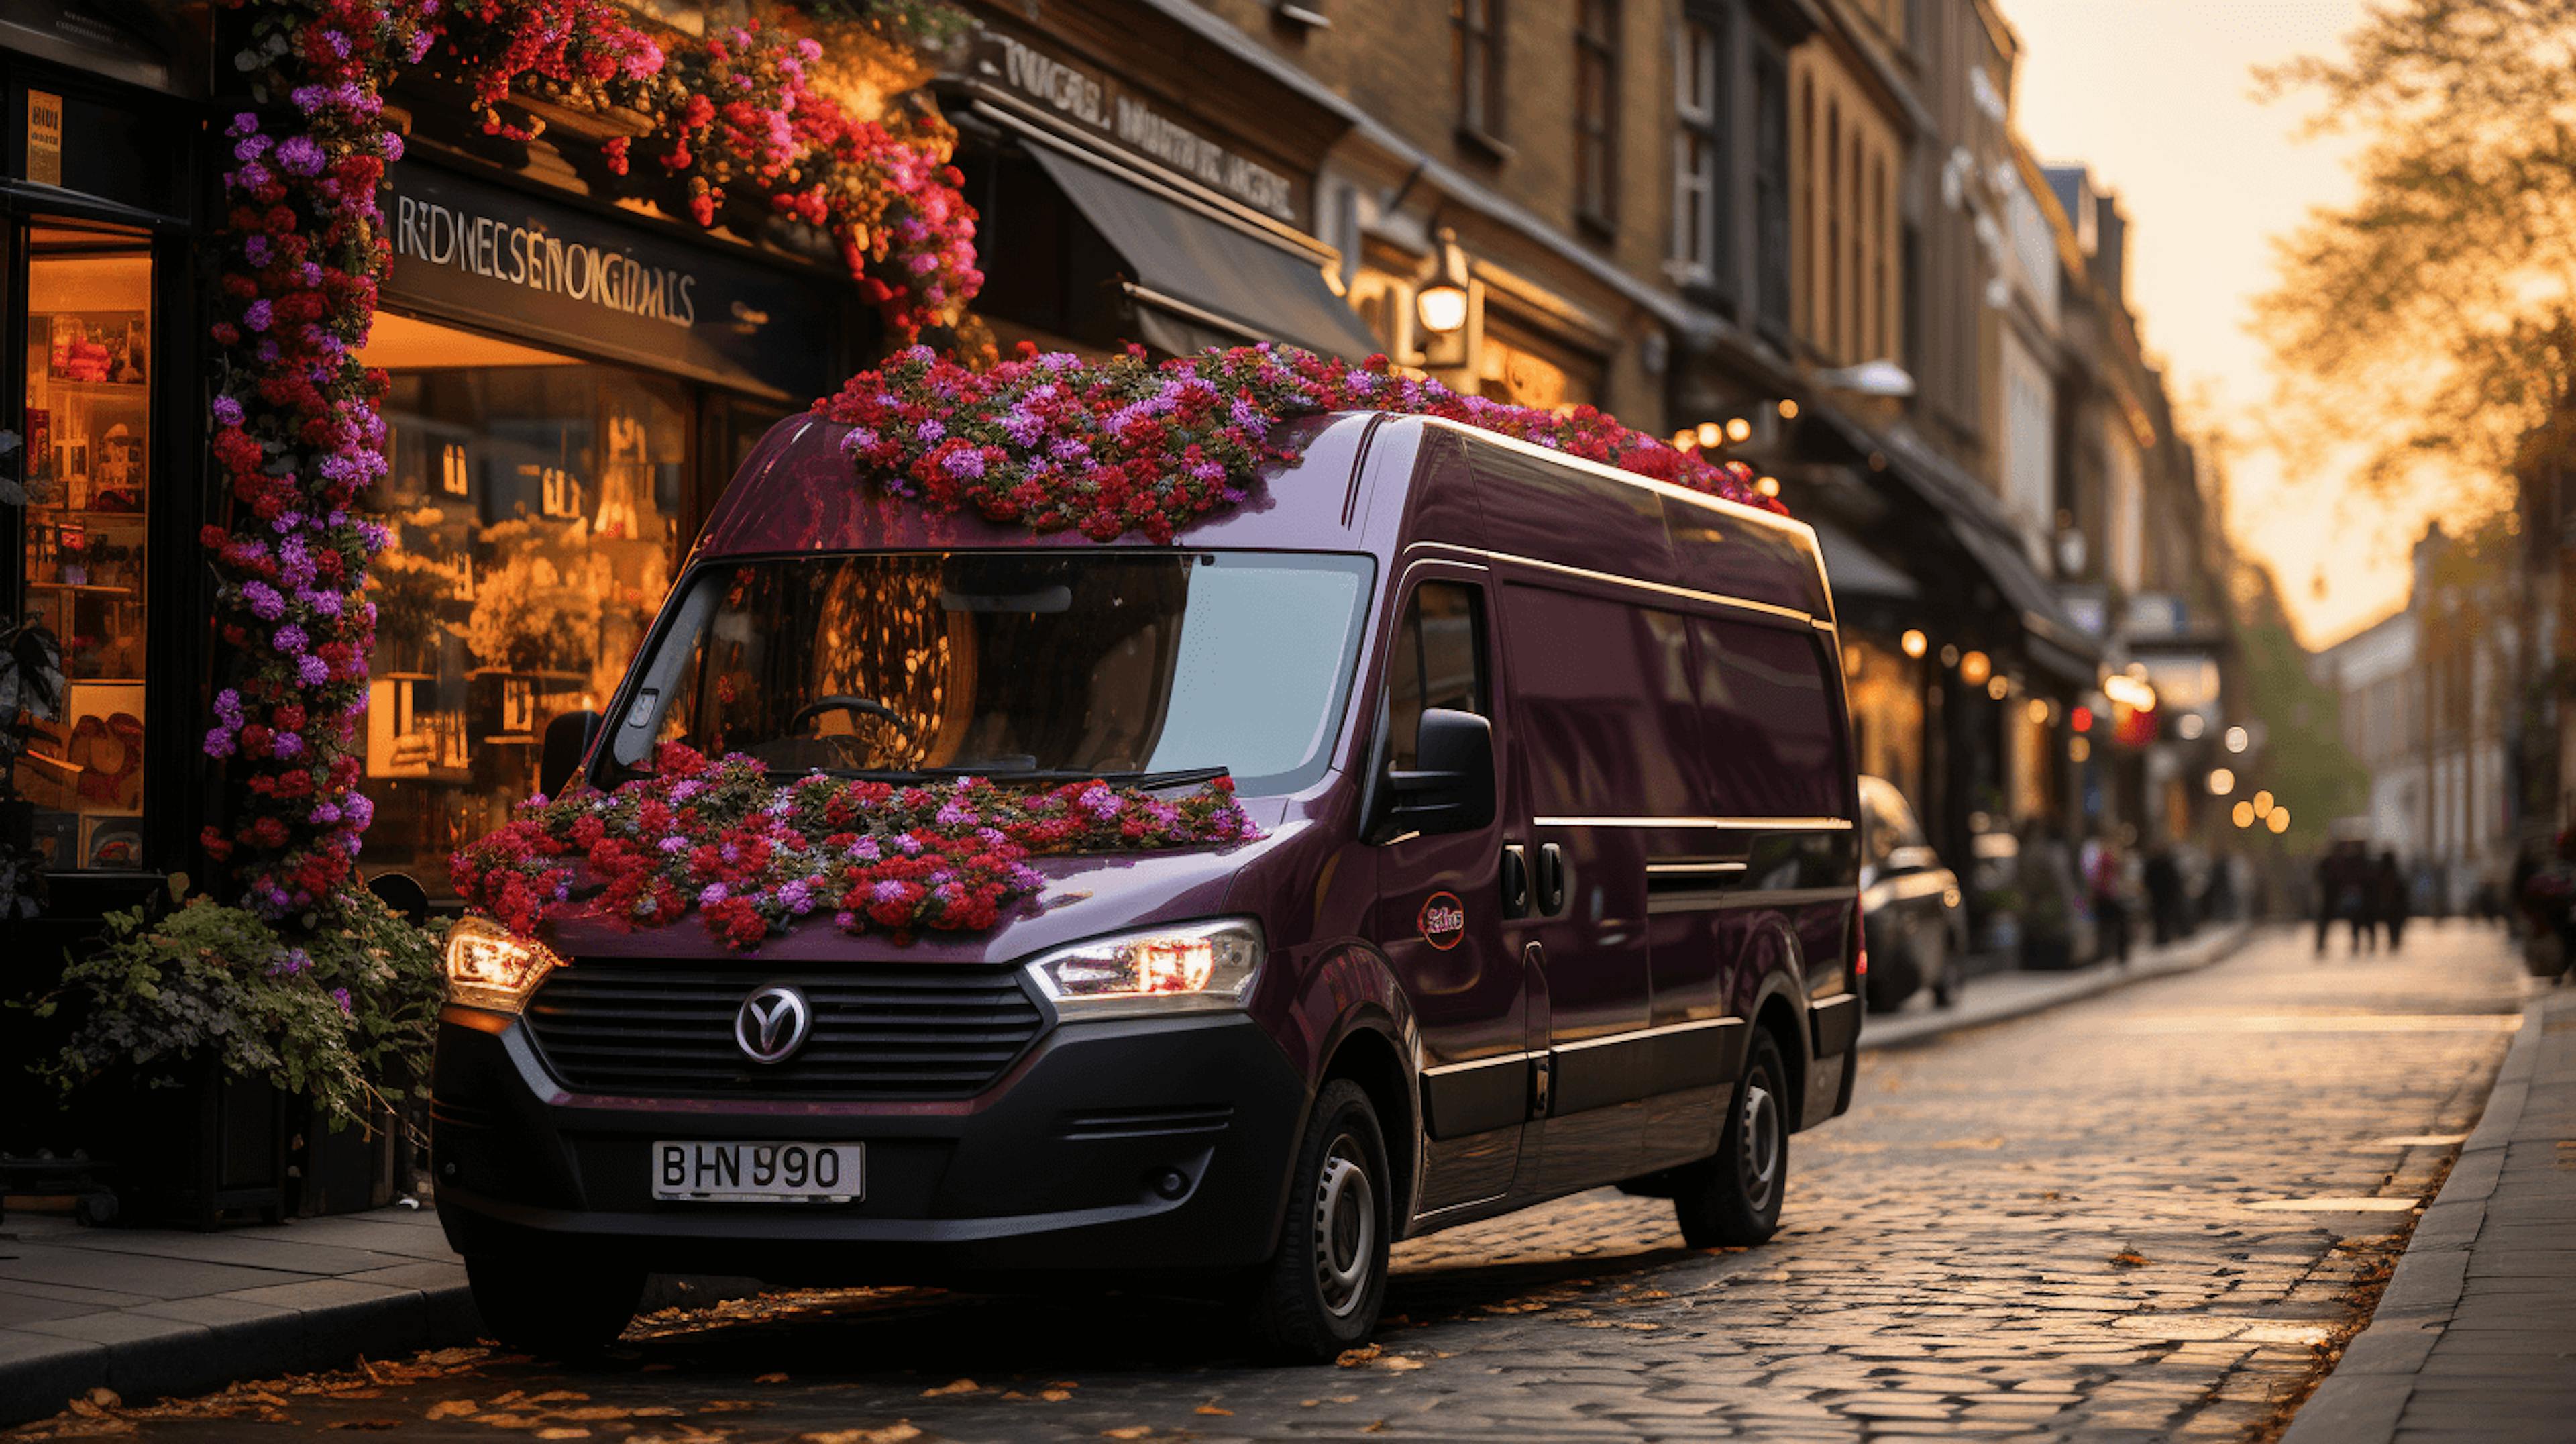 a purple flower adorned van is parked on the street